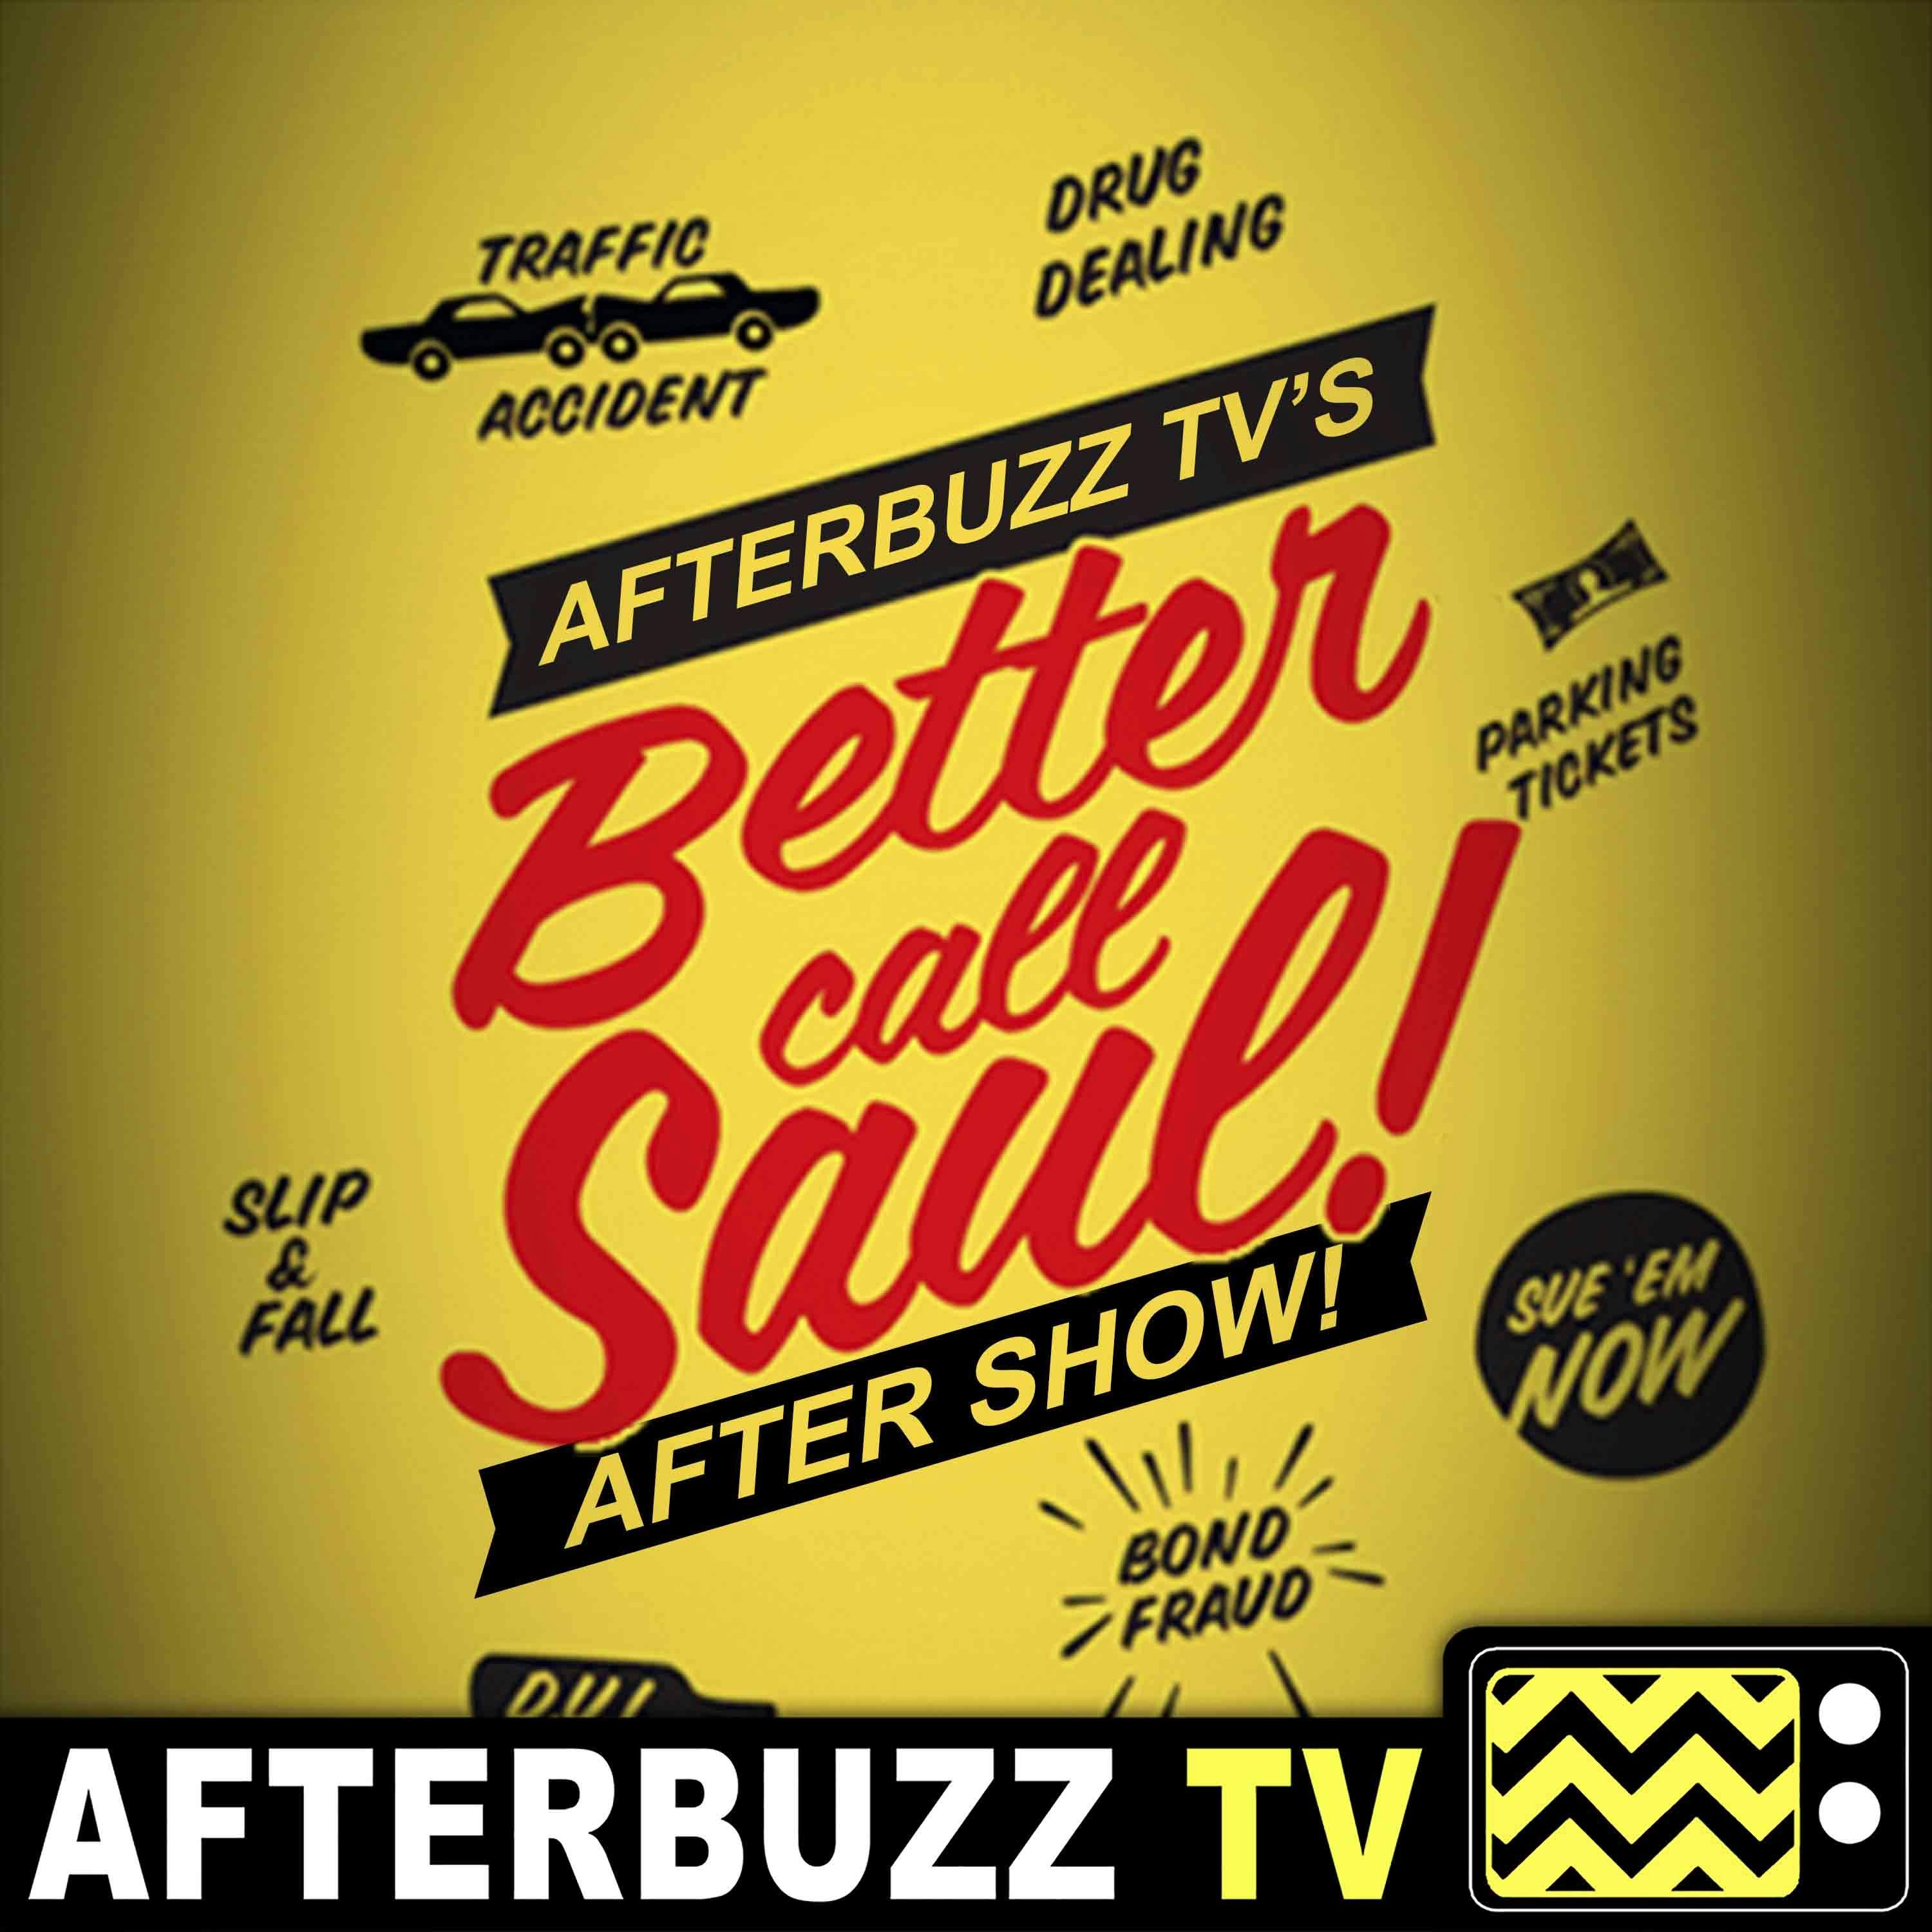 Better Call Saul S:1 | Rhea Seehorn Guests On Hero E:4 | AfterBuzz TV AfterShow